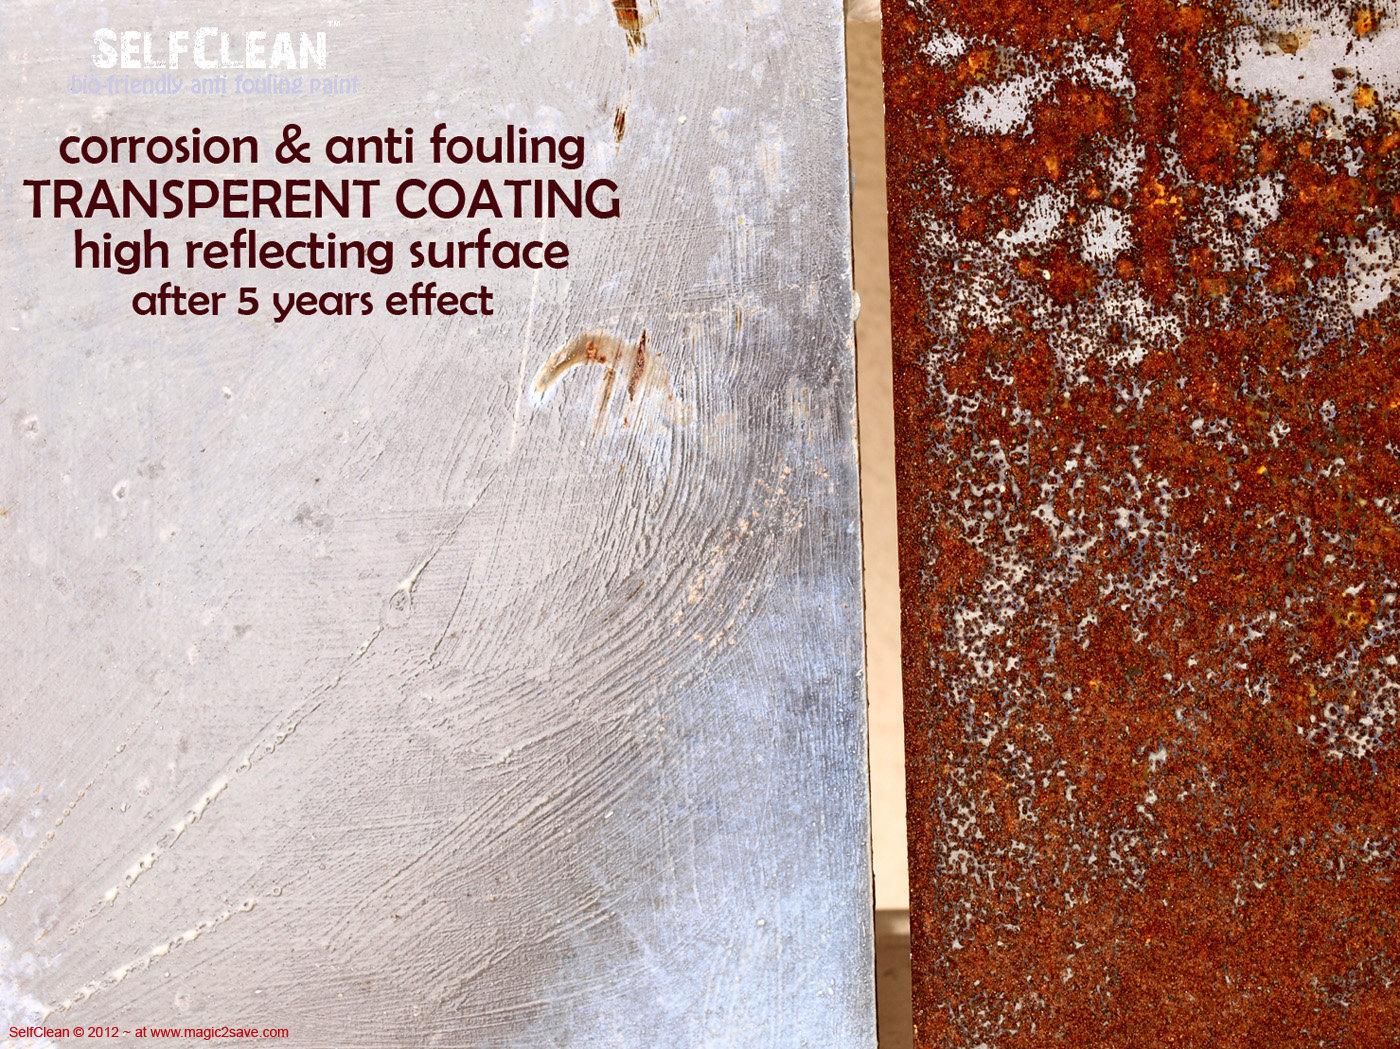 SelfClean corrosion test of antifouling paint